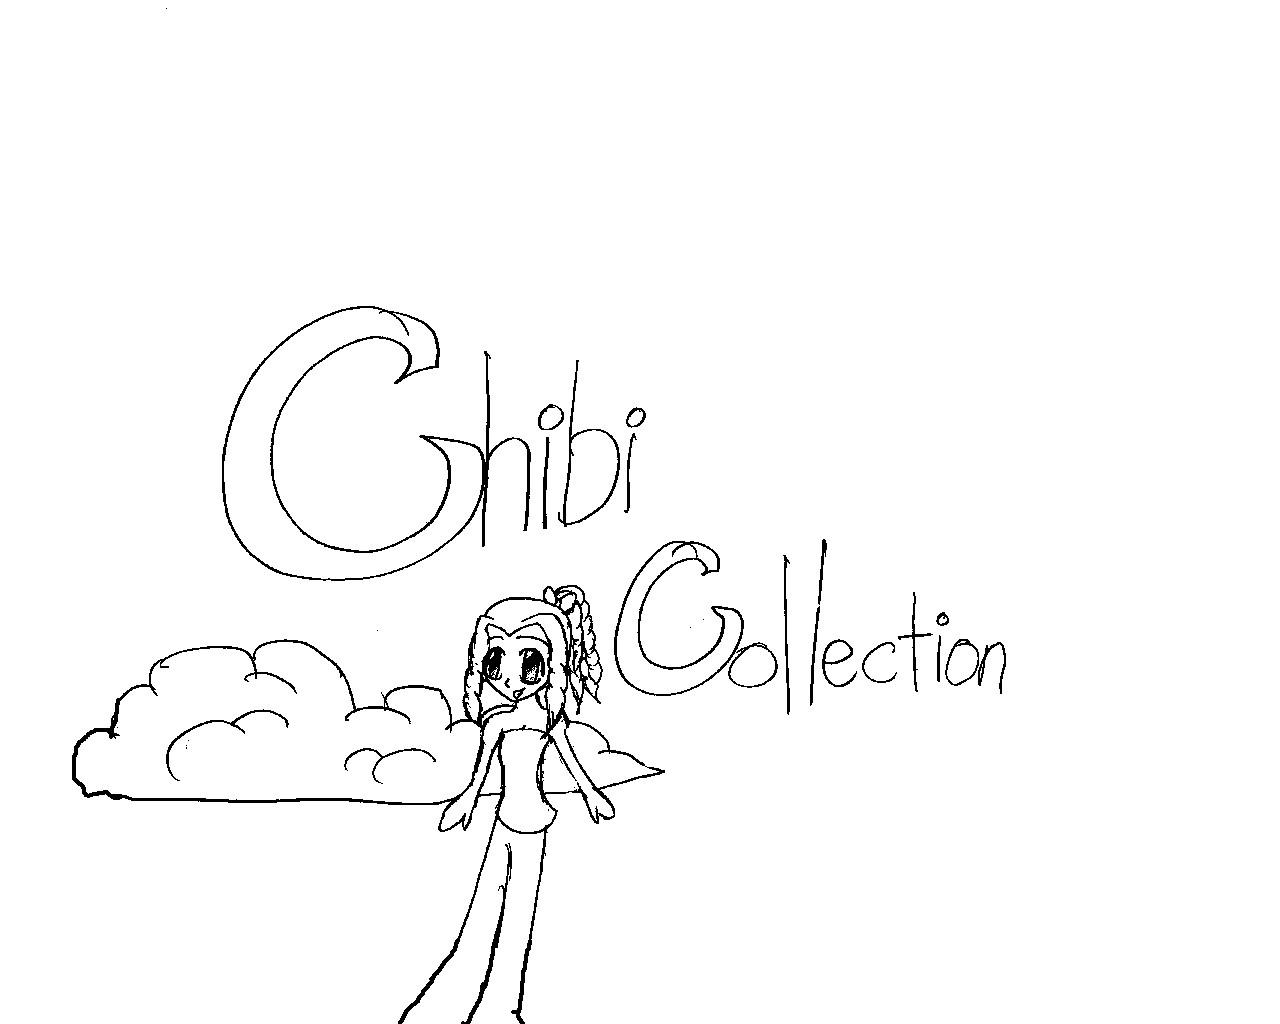 Chibi Collection by AnimaLover559